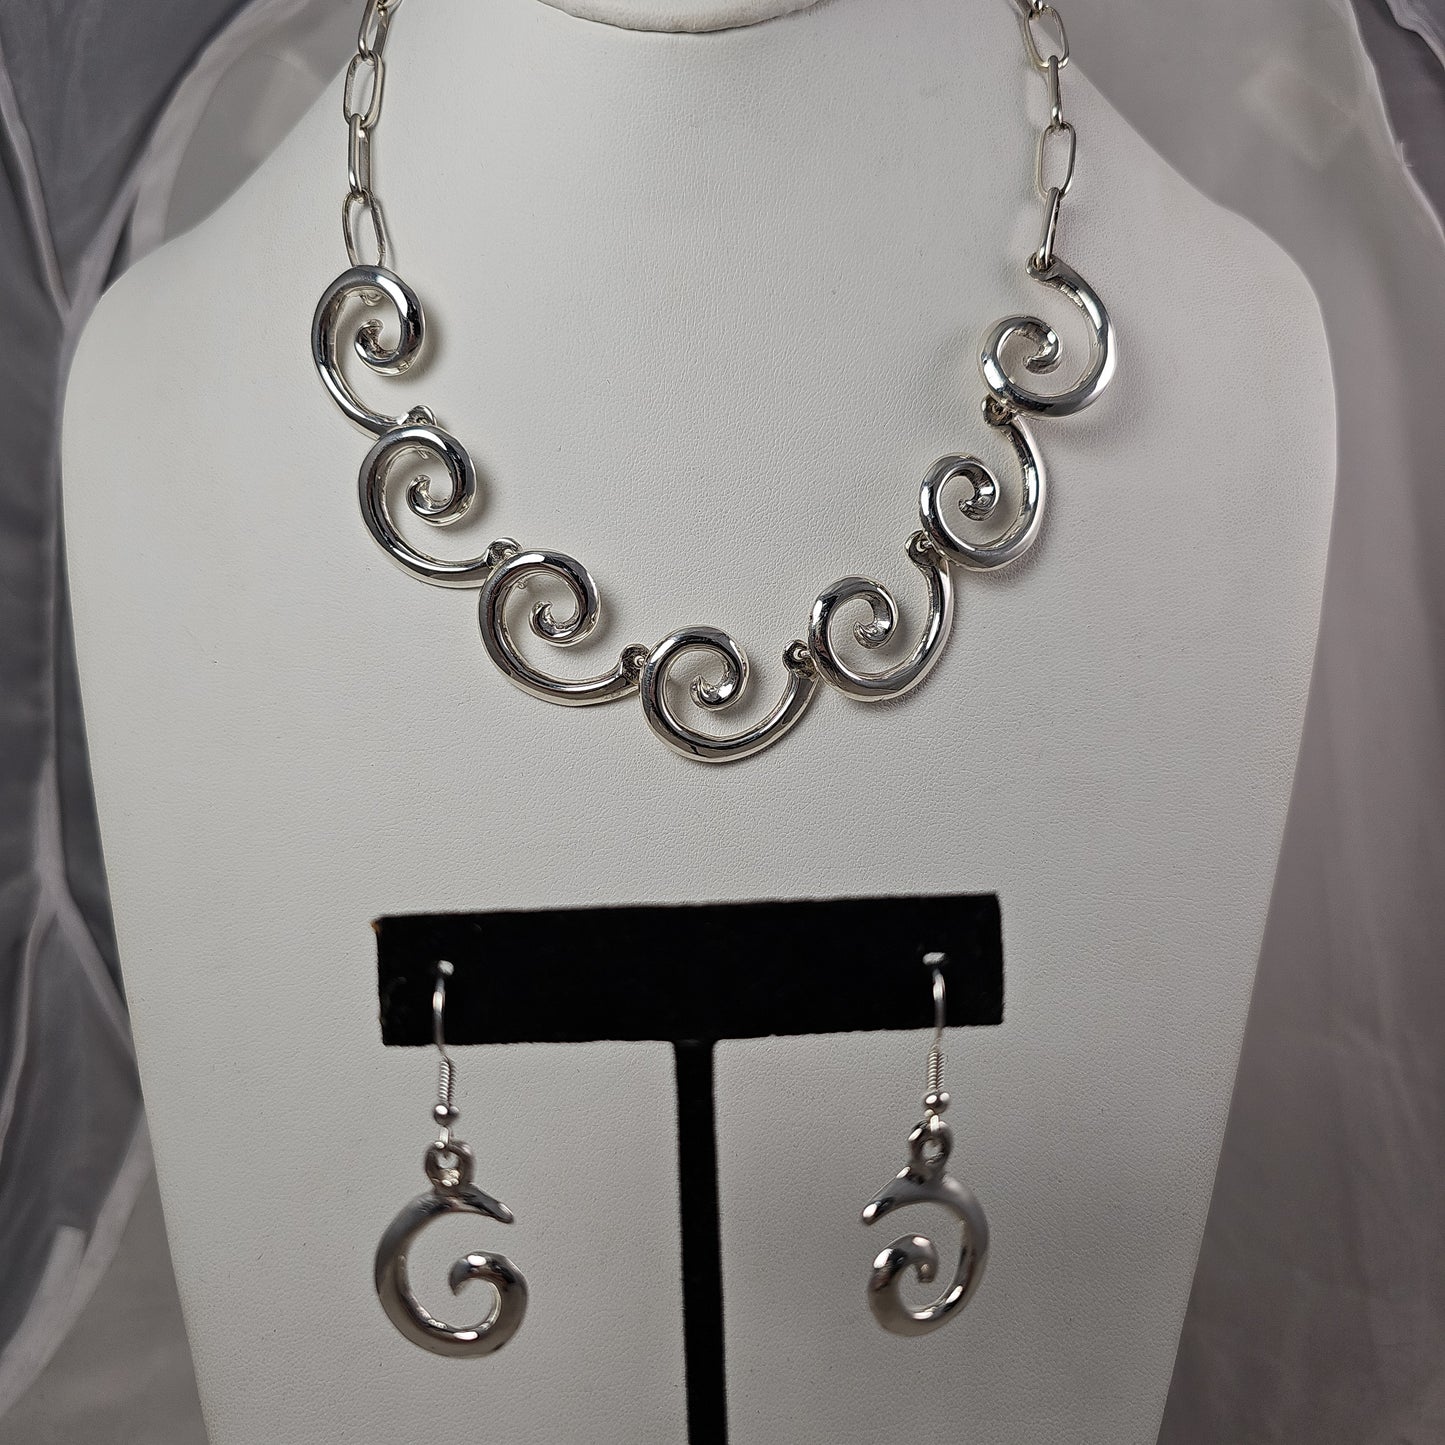 Wave necklace & earring set